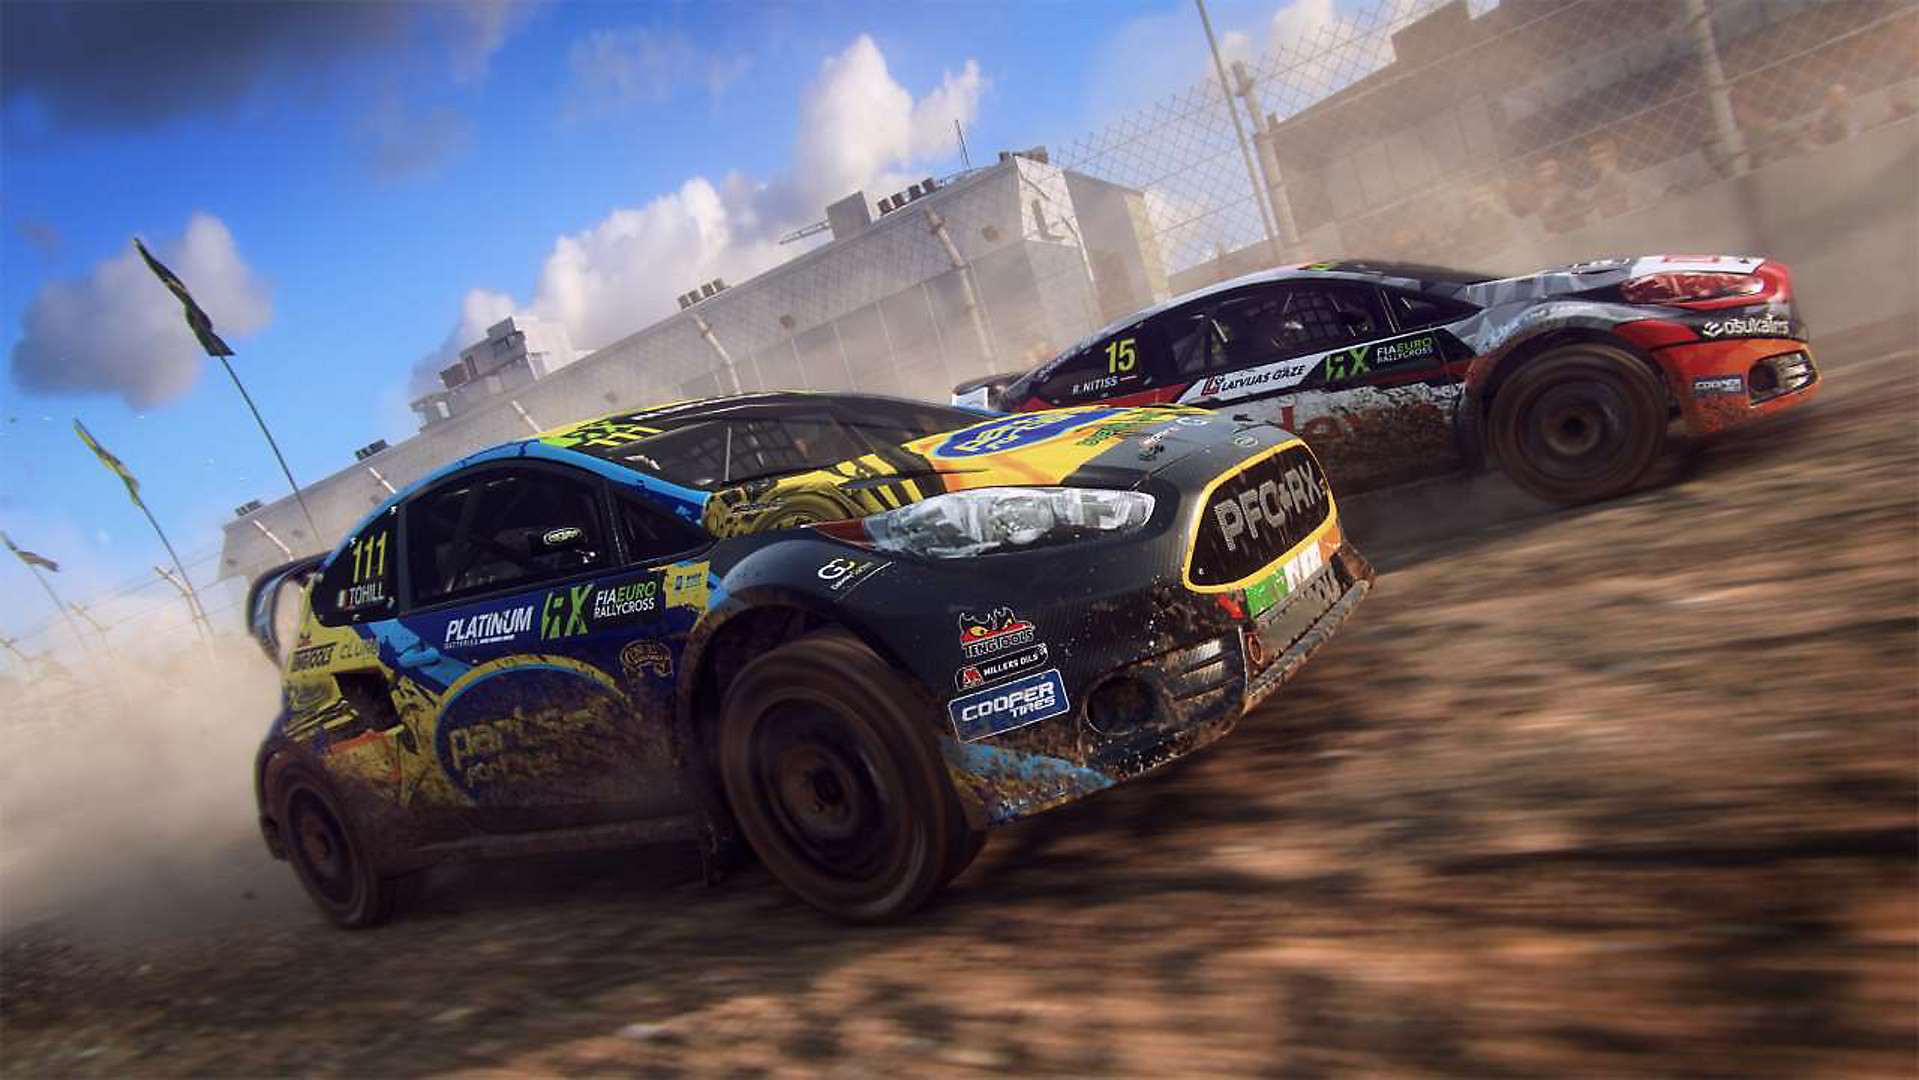 metacritic on X: List of Free Games for PS4, Xbox One, and PC:   Uncharted 4: A Thief's End and Dirt Rally 2.0  officially announced for PS Plus  / X